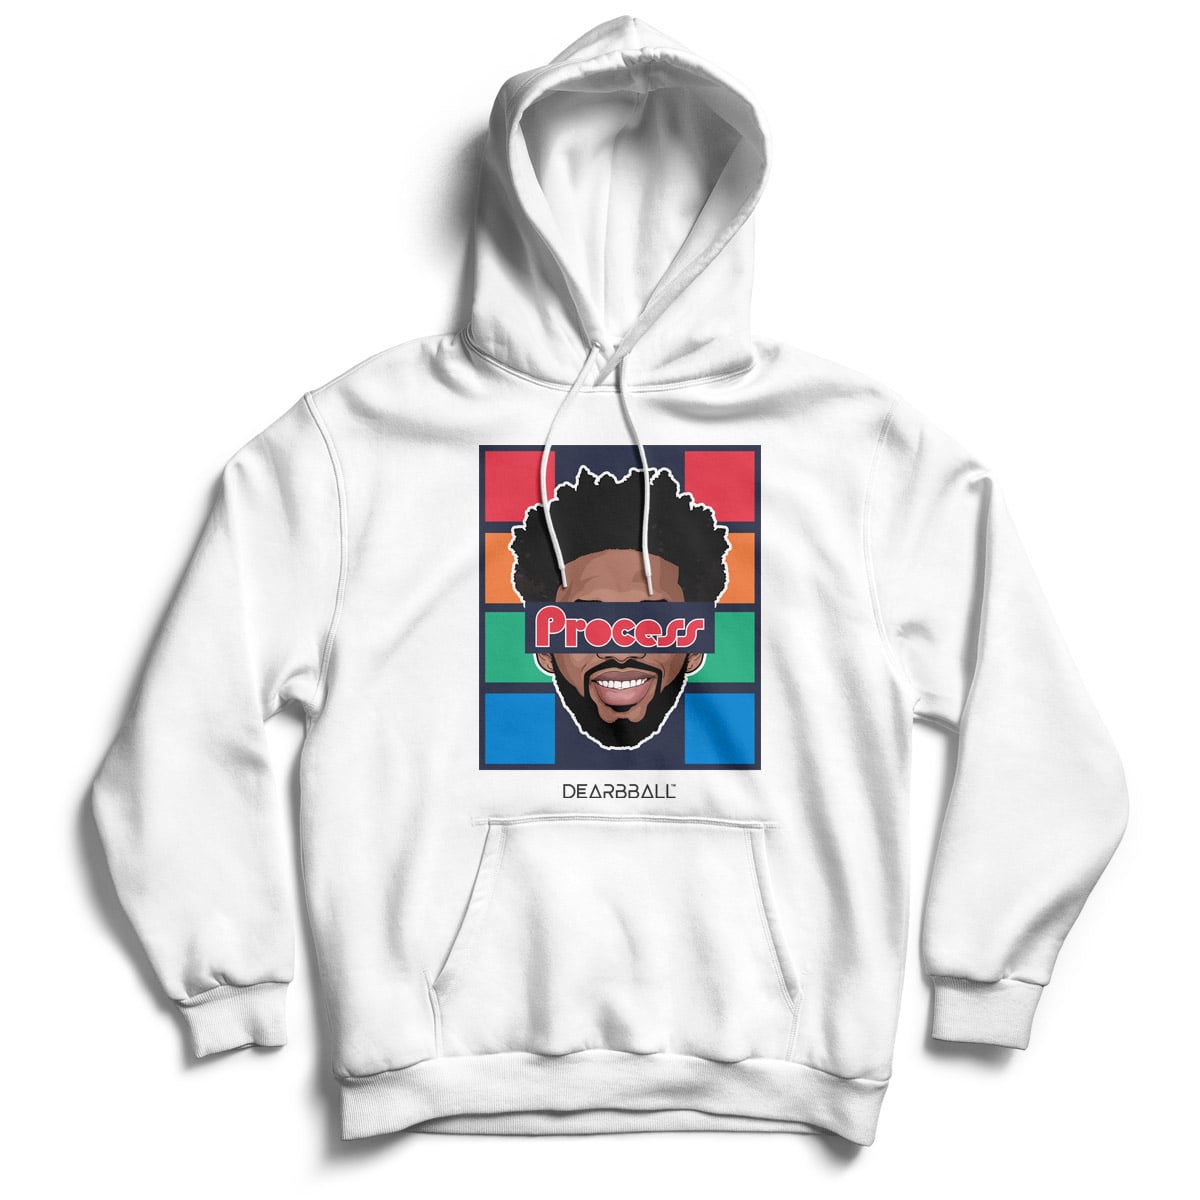 [CHILDREN] DearBBall Hooded Sweatshirt - Process Philly 70s Edition